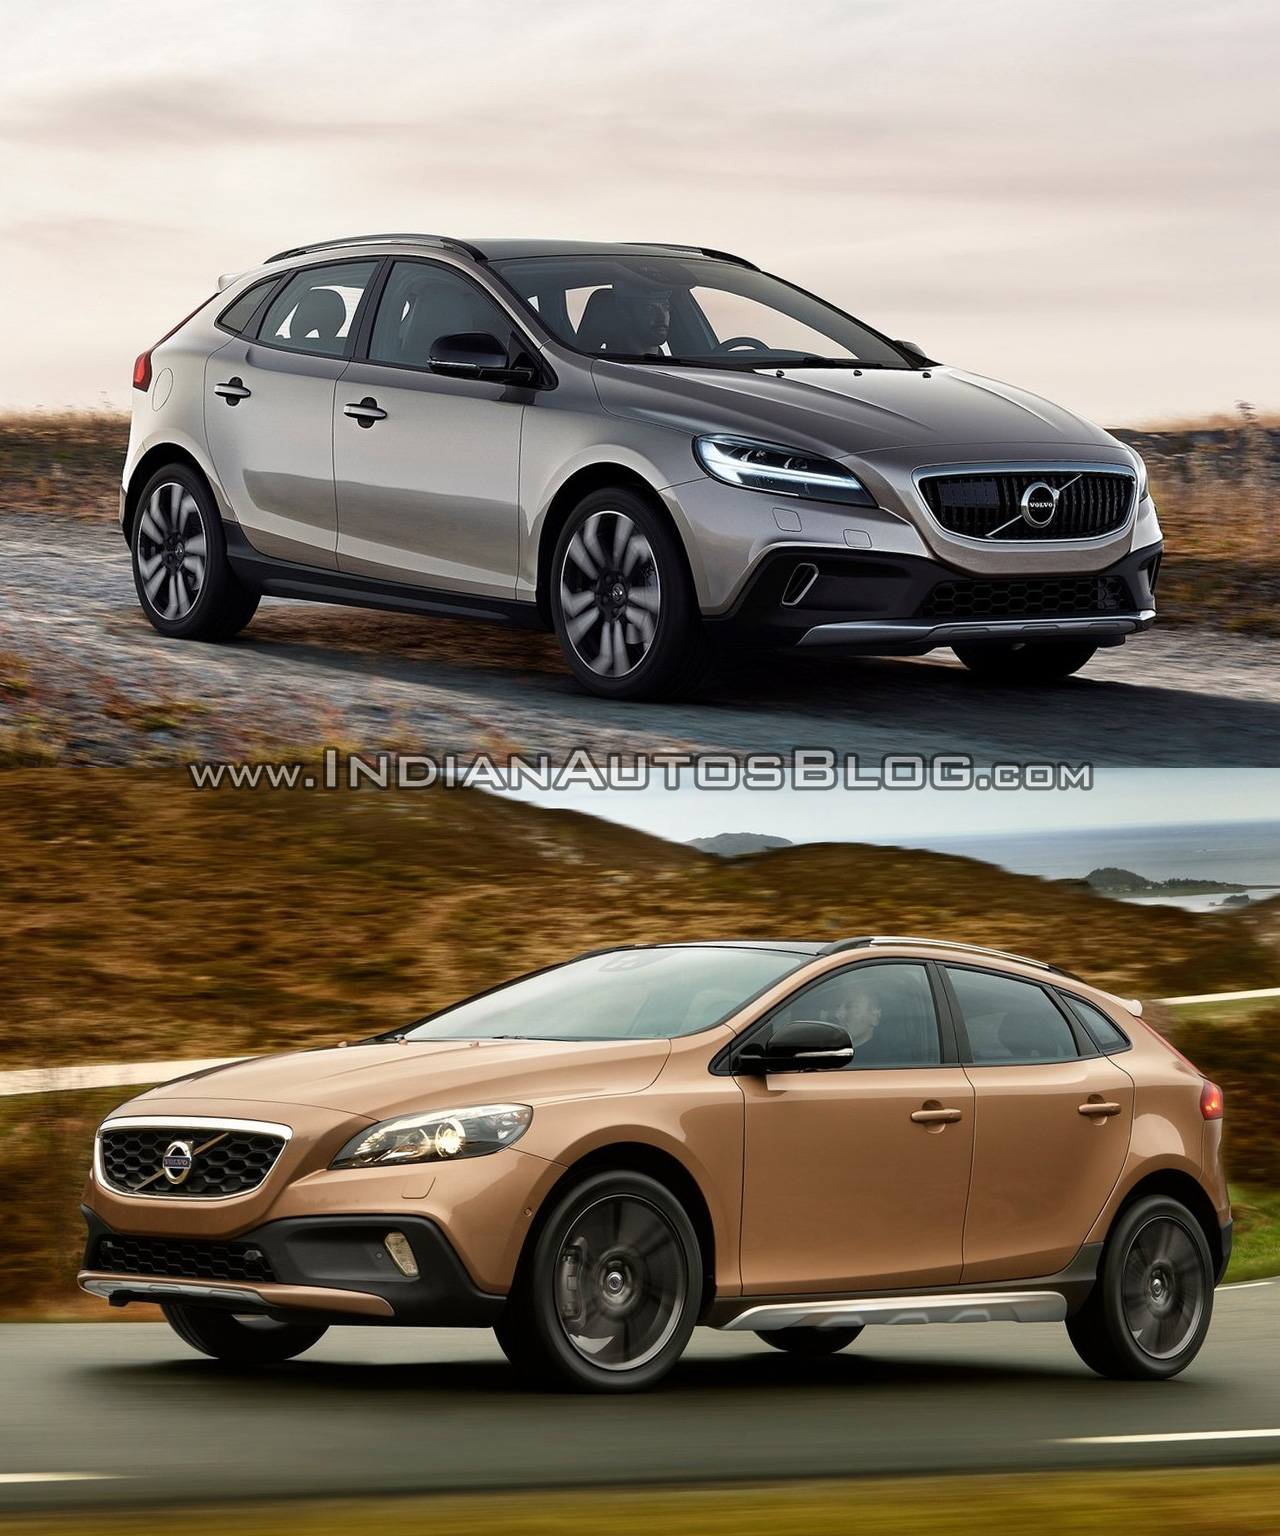 2016 Volvo V40 (facelift) and Cross Country - Old vs. New